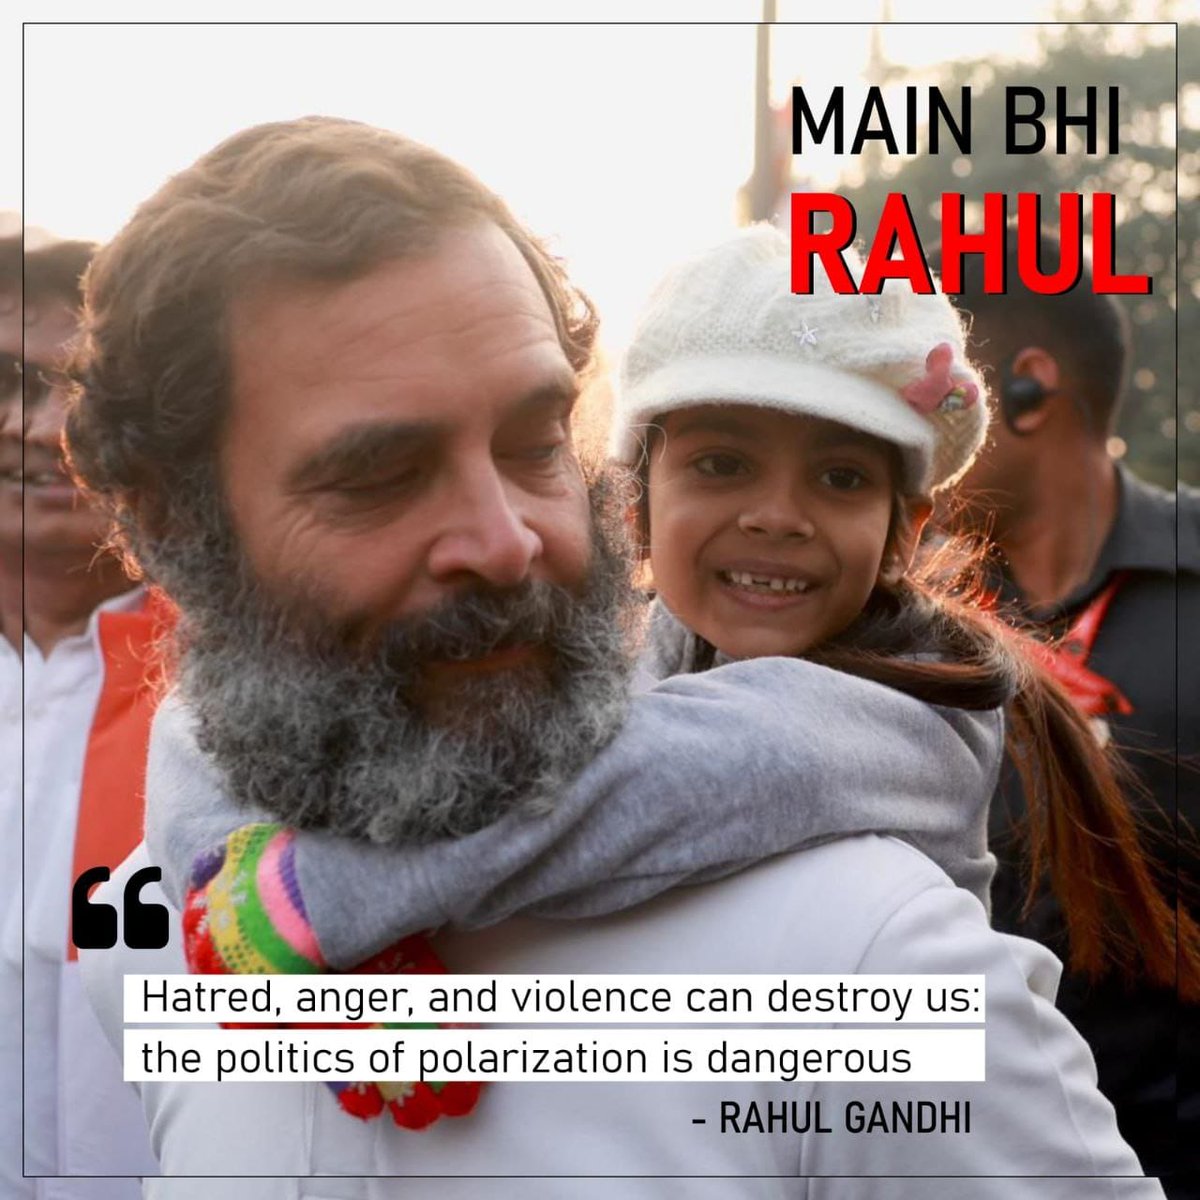 Time for love, Time for Congress
#UWCisIWC
#iamwithcongress
#MainBhiRahul